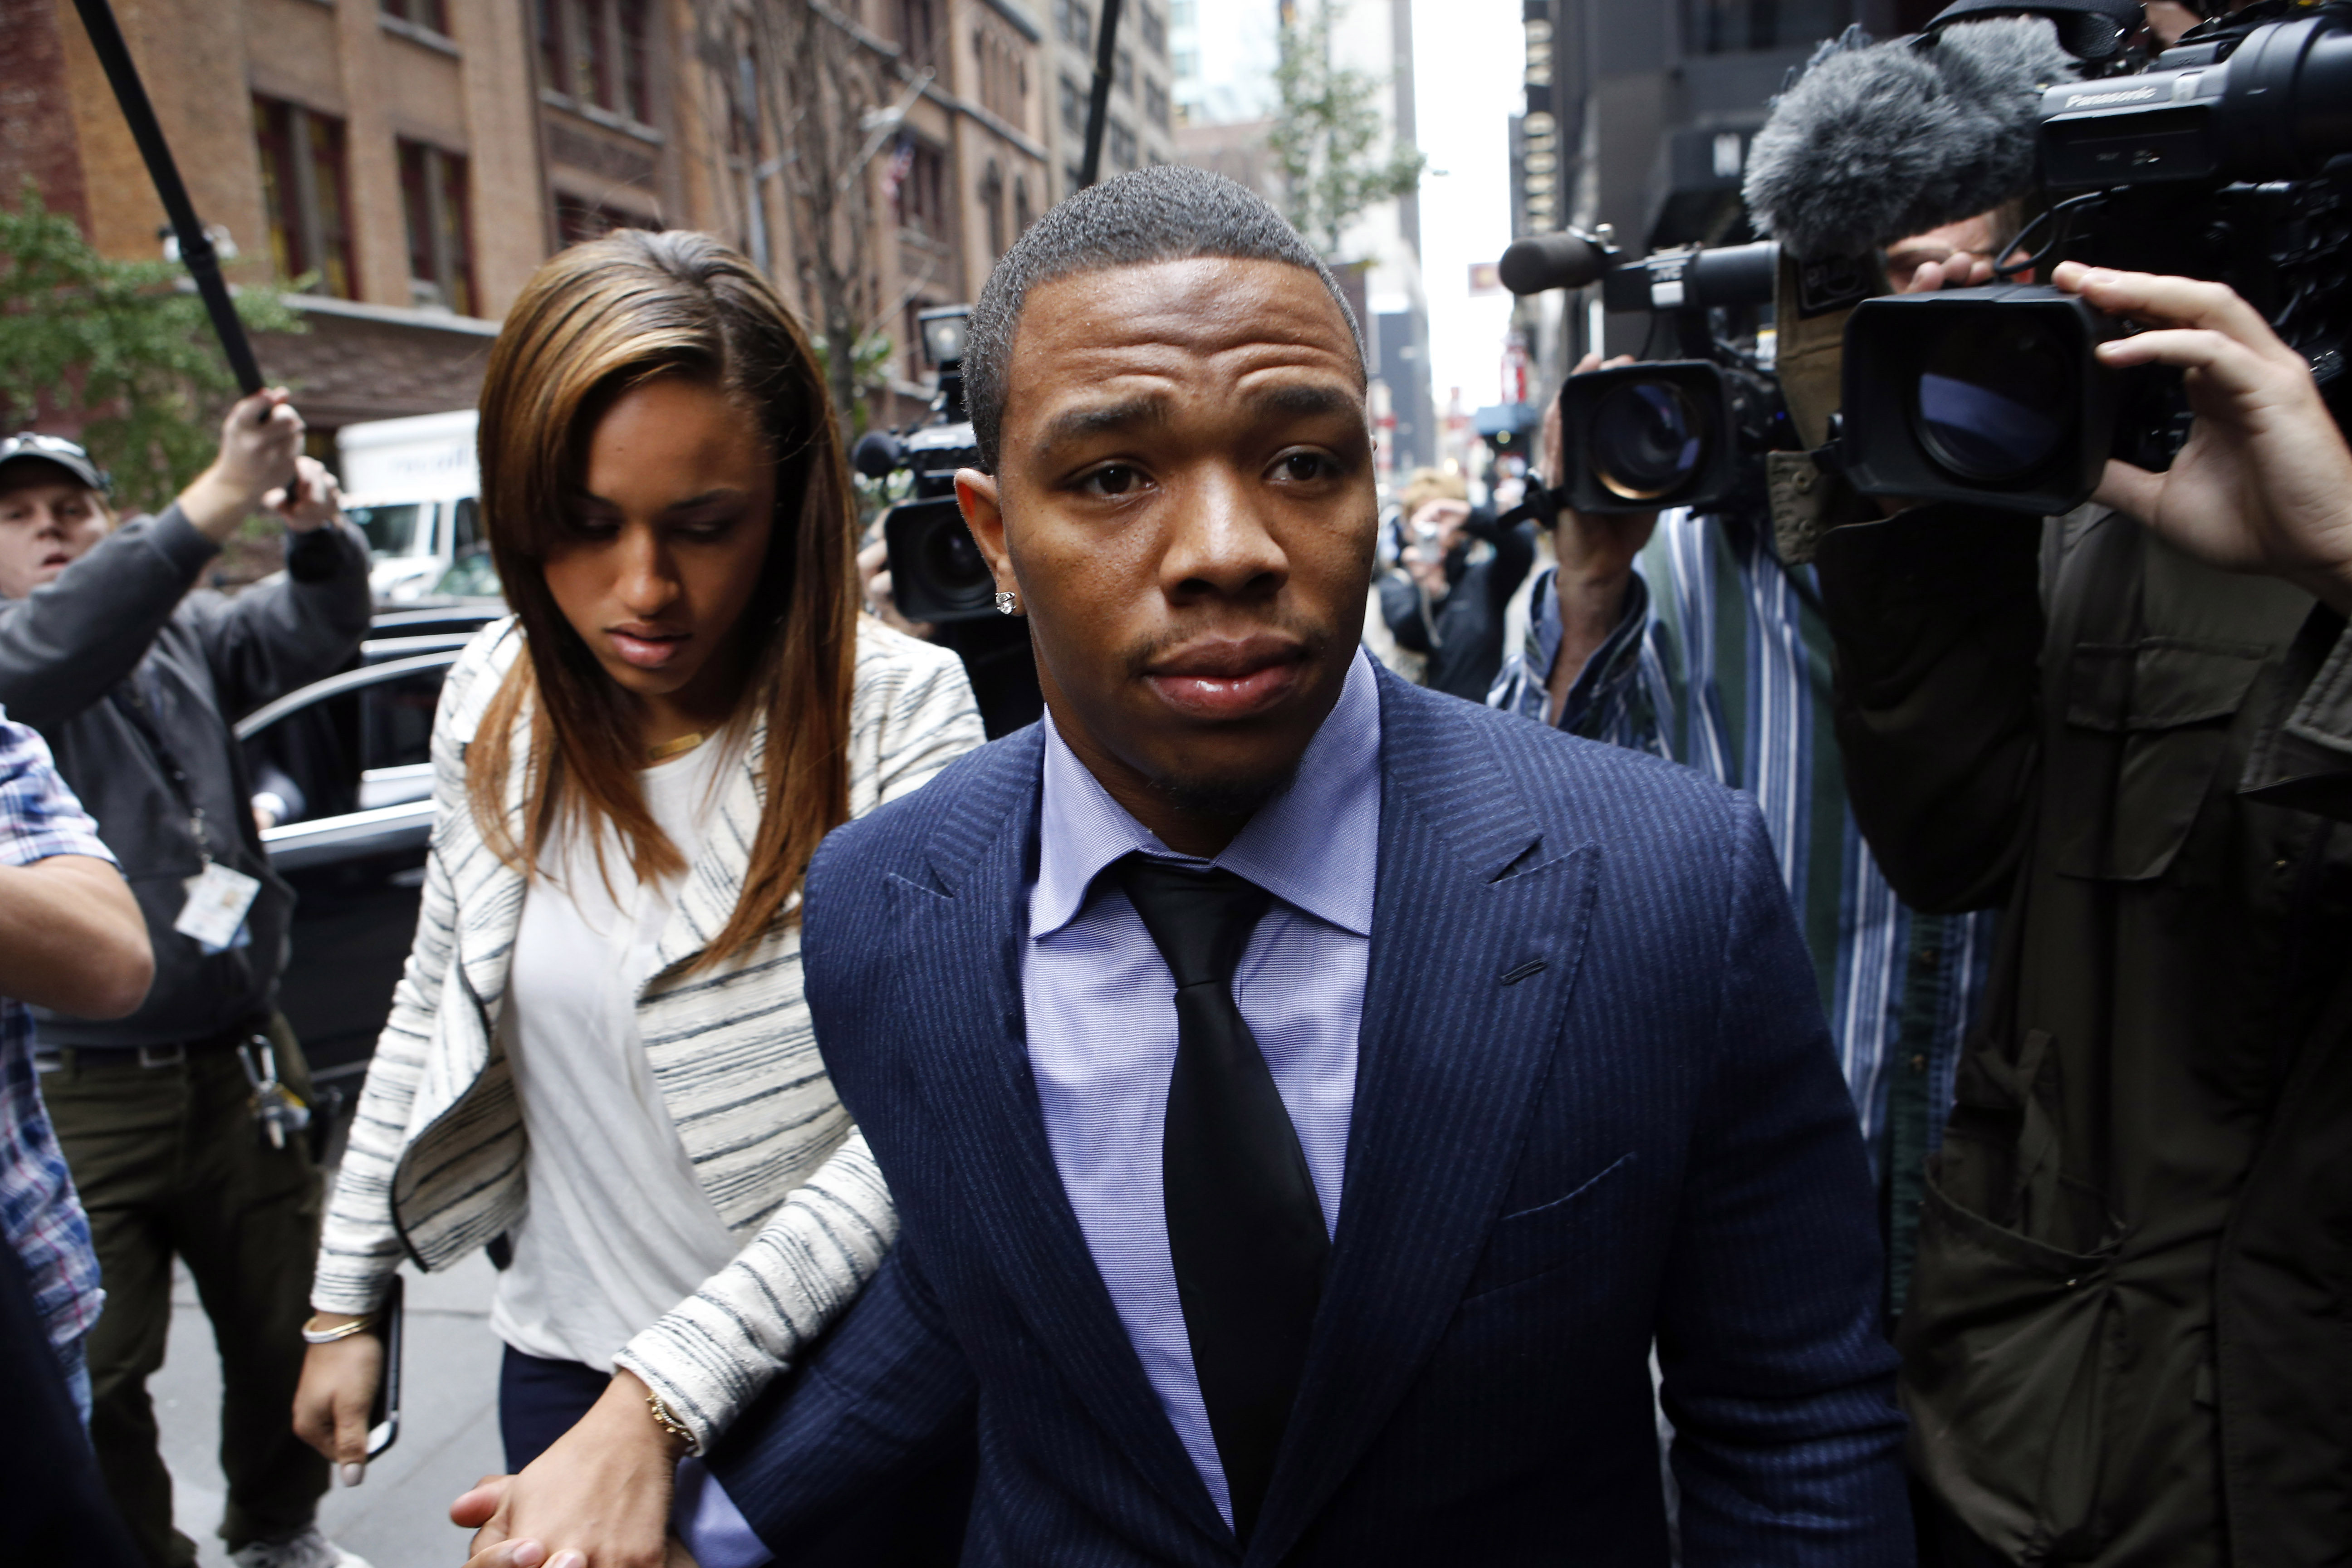 FILE - In this Nov. 5, 2014, file photo, Ray Rice arrives with his wife Janay Palmer for an appeal hearing of his indefinite suspension from the NFL in New York. Rice has won the appeal of his indefinite suspension by the NFL, which has been "vacated immediately," the NFL football players' union said Friday, Nov. 28, 2014. (AP Photo/Jason DeCrow, File)